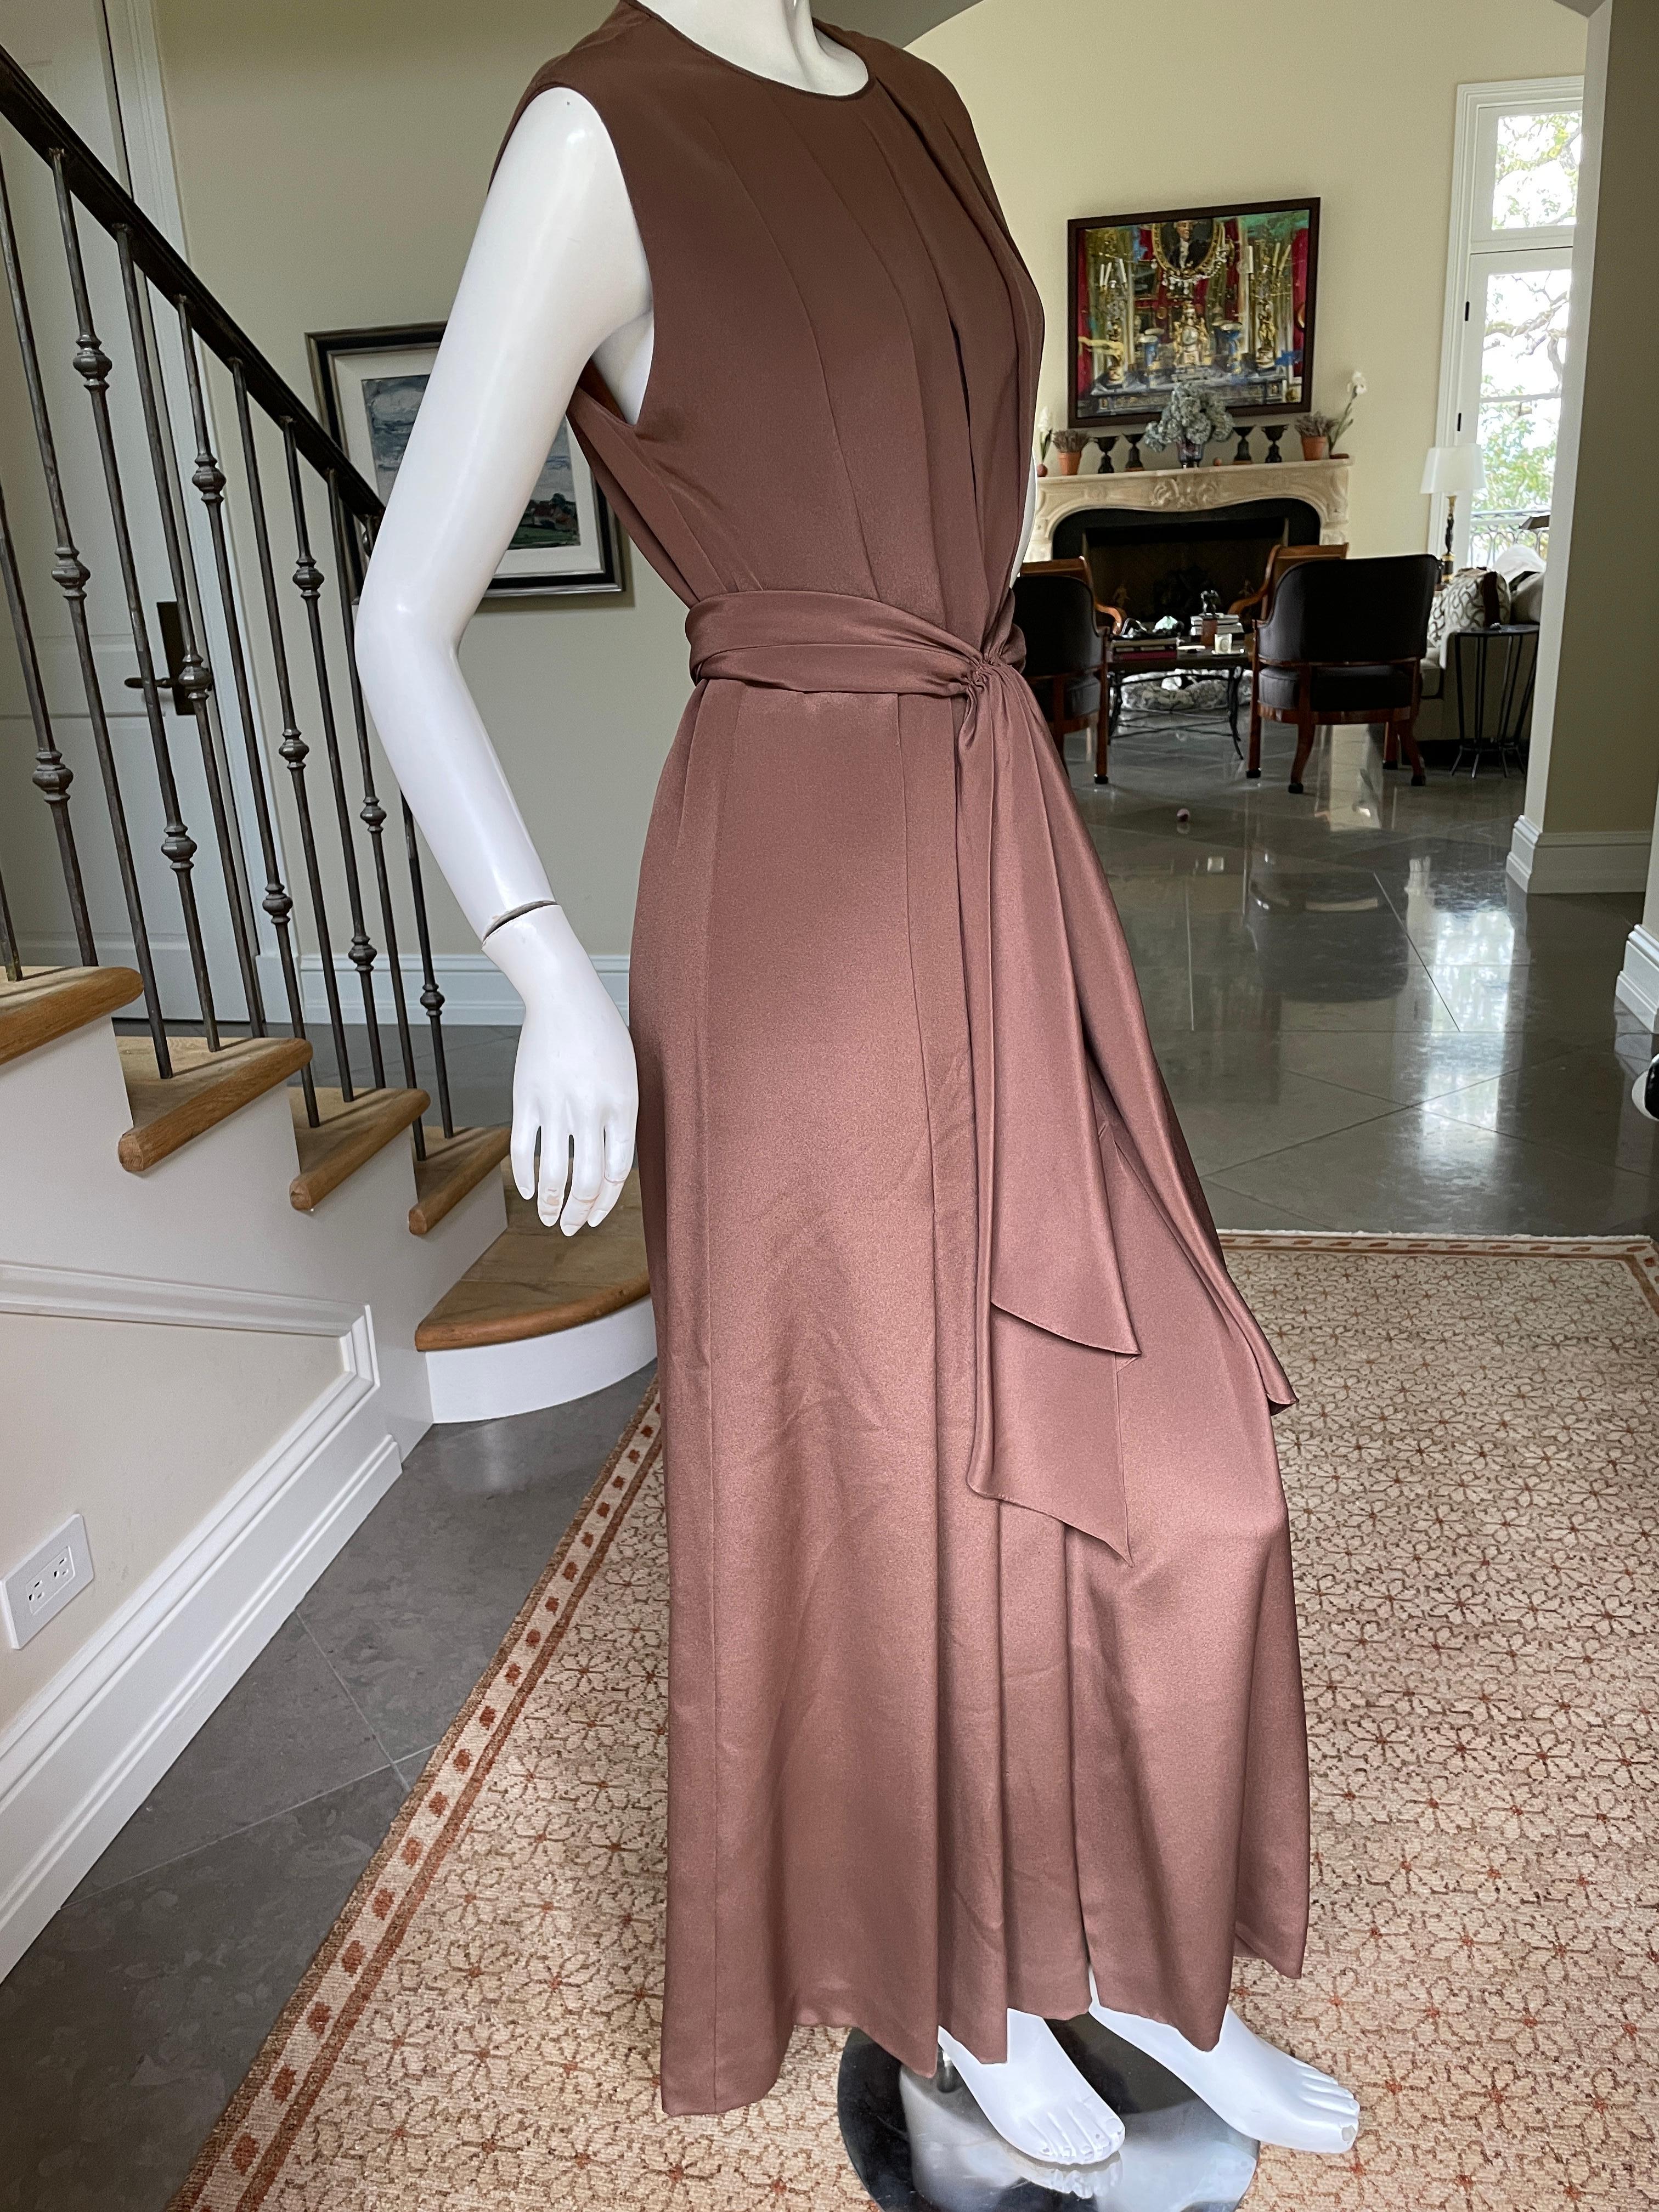 James Galanos Vintage Brown Silk Sleeveless Evening Dress with Sash Belt In Excellent Condition For Sale In Cloverdale, CA